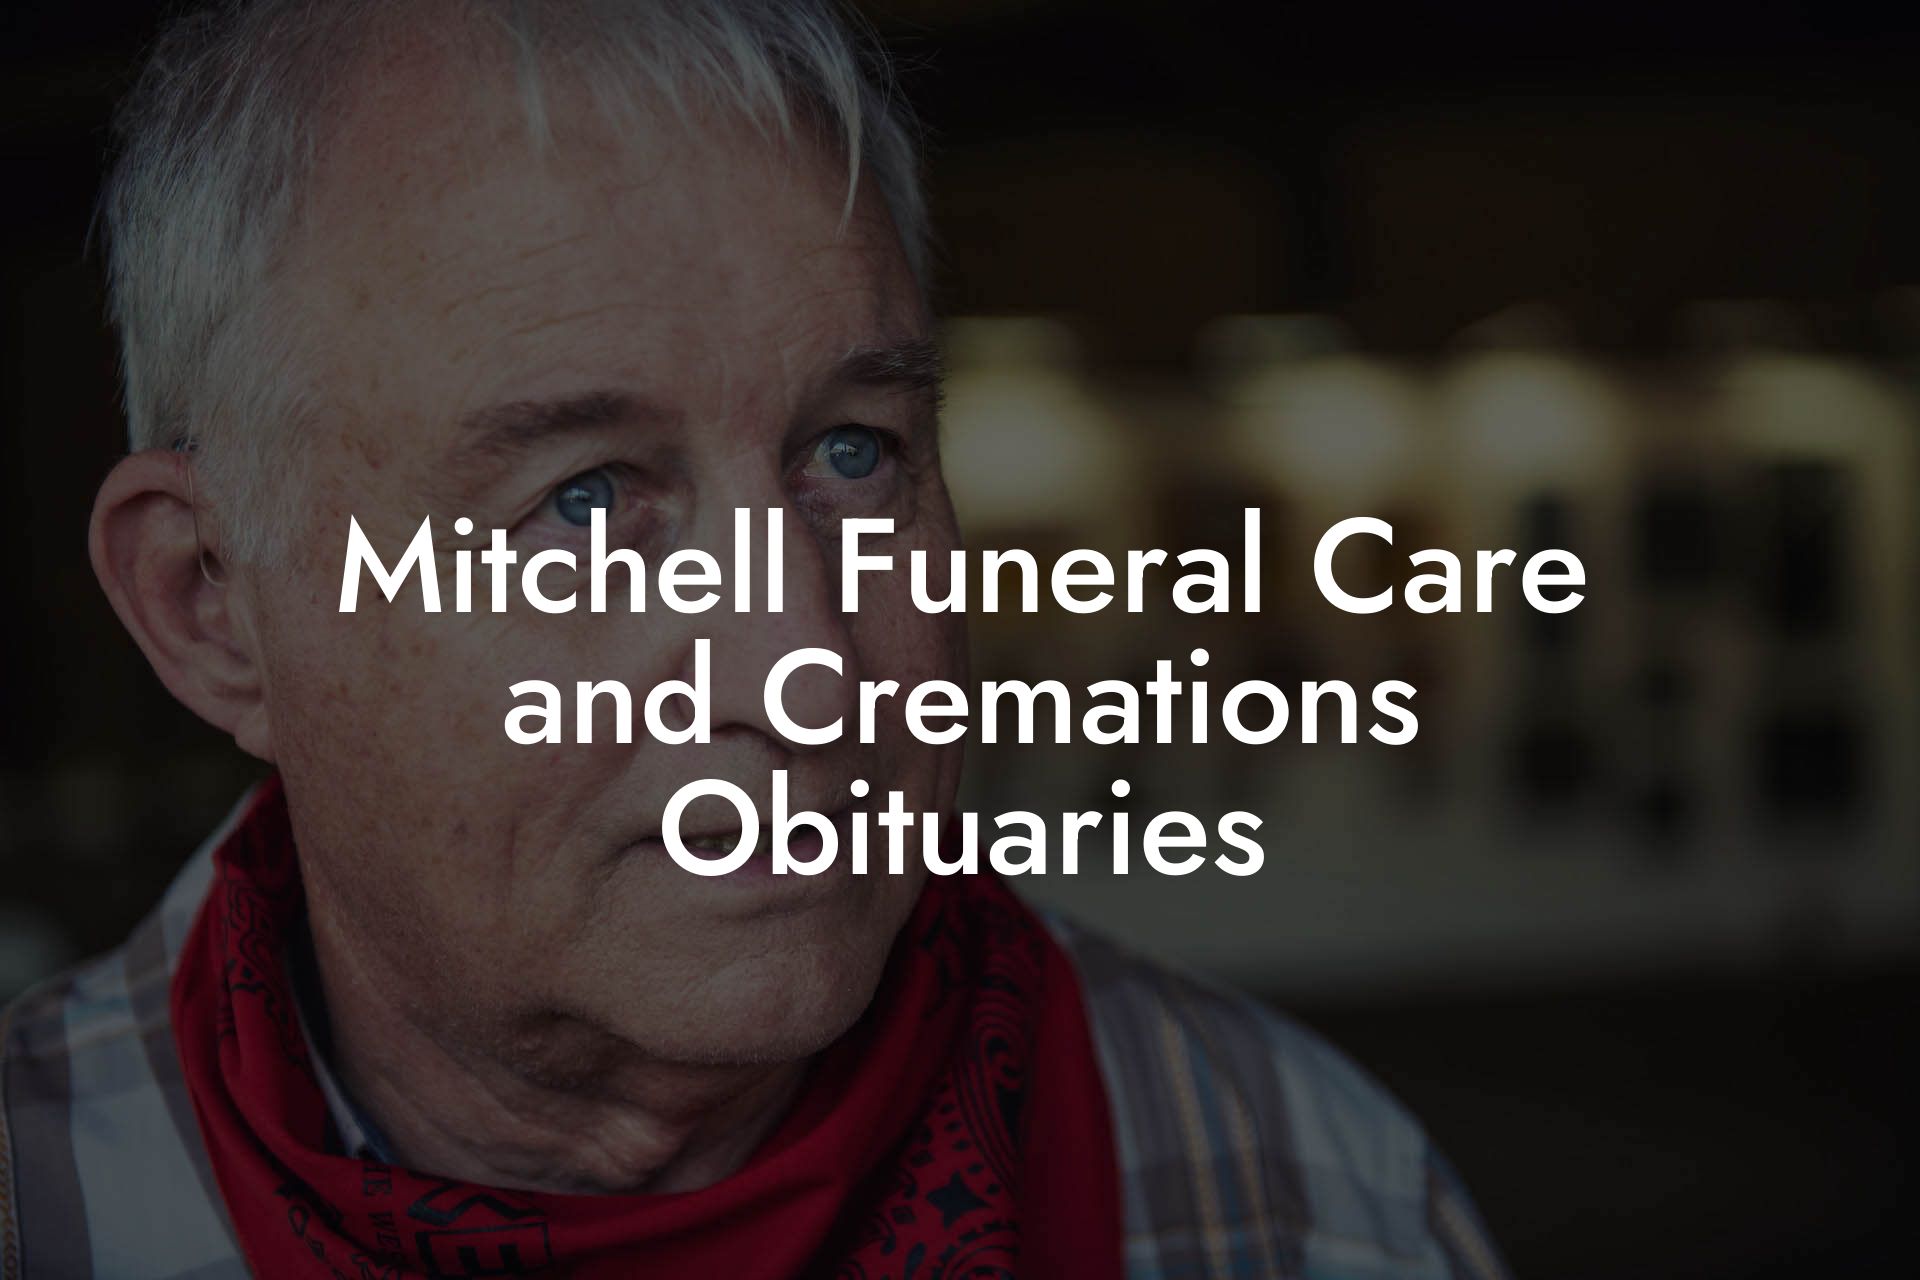 Mitchell Funeral Care and Cremations Obituaries